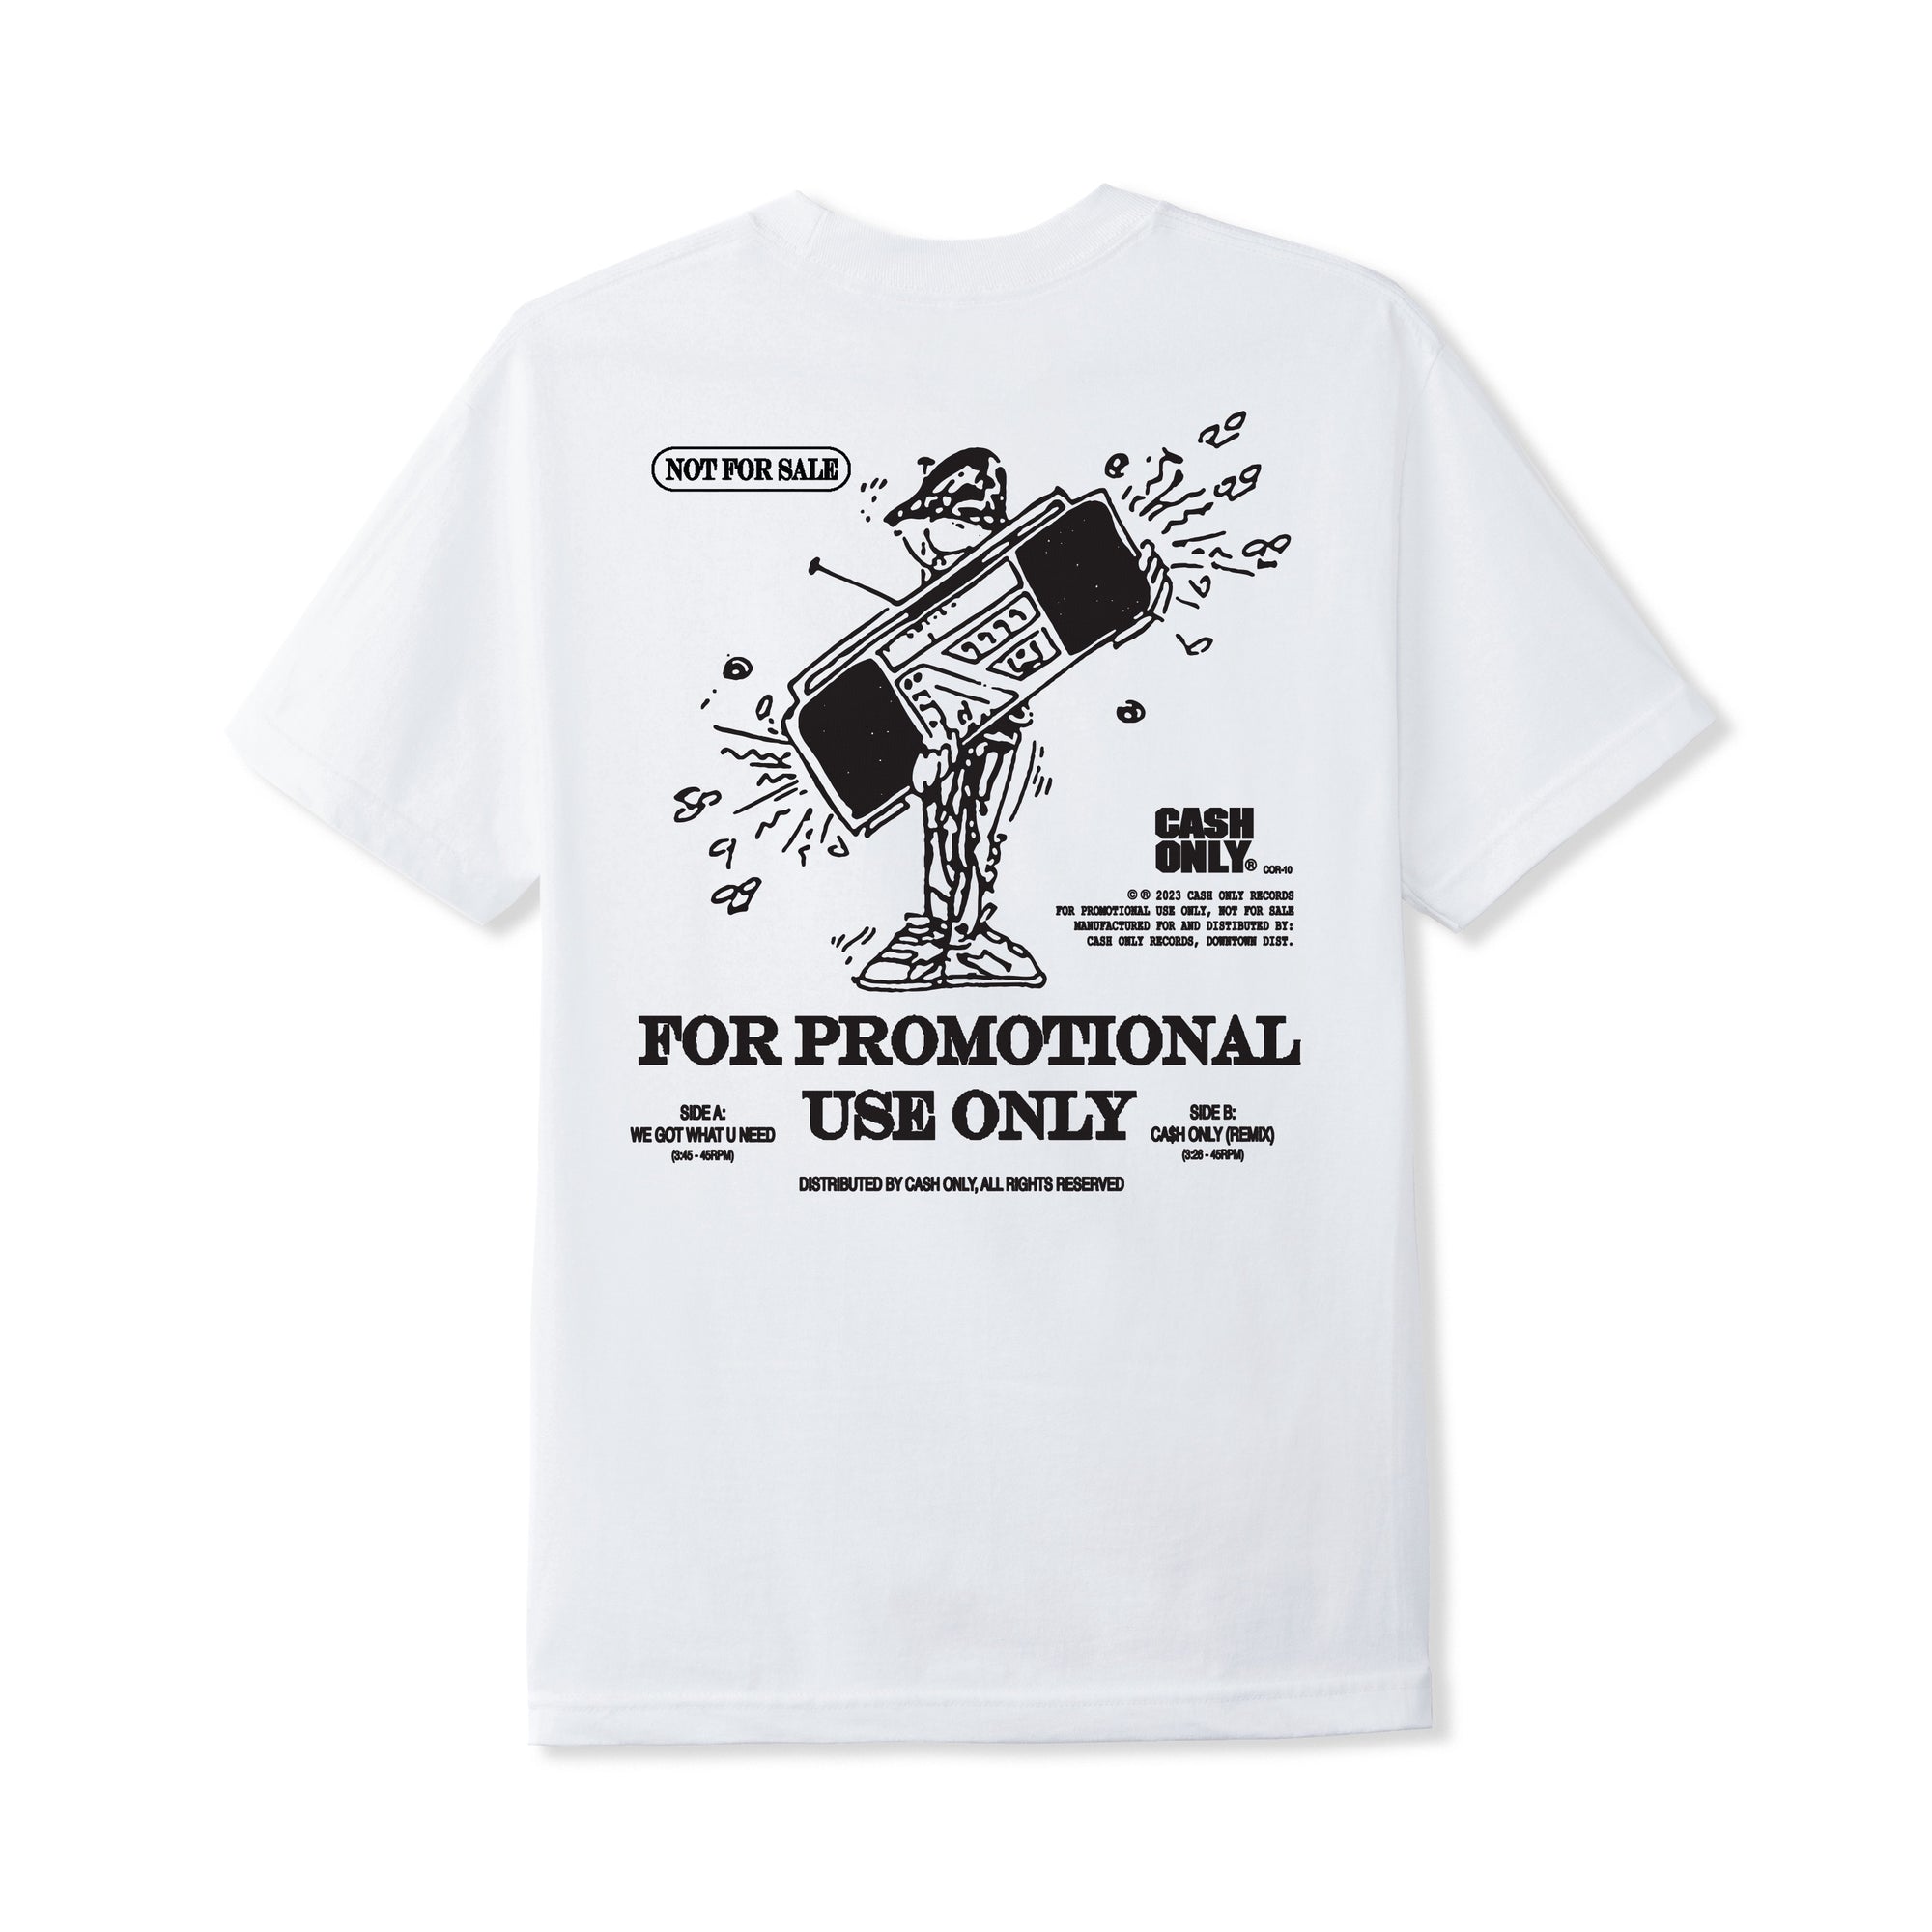 Cash Only Promotional Use Tee - White